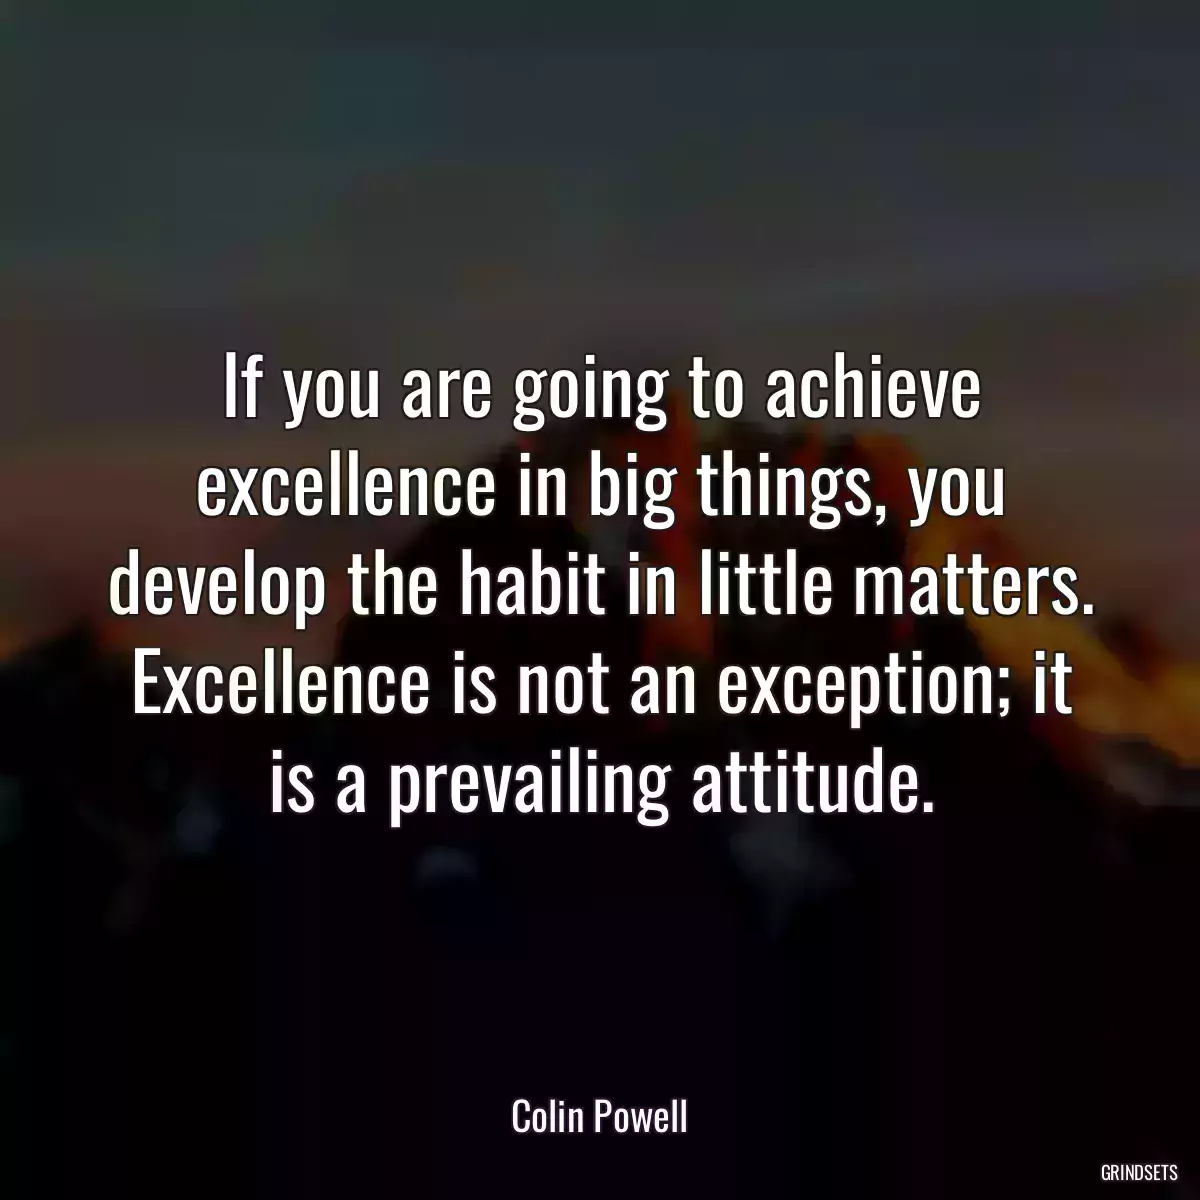 If you are going to achieve excellence in big things, you develop the habit in little matters. Excellence is not an exception; it is a prevailing attitude.